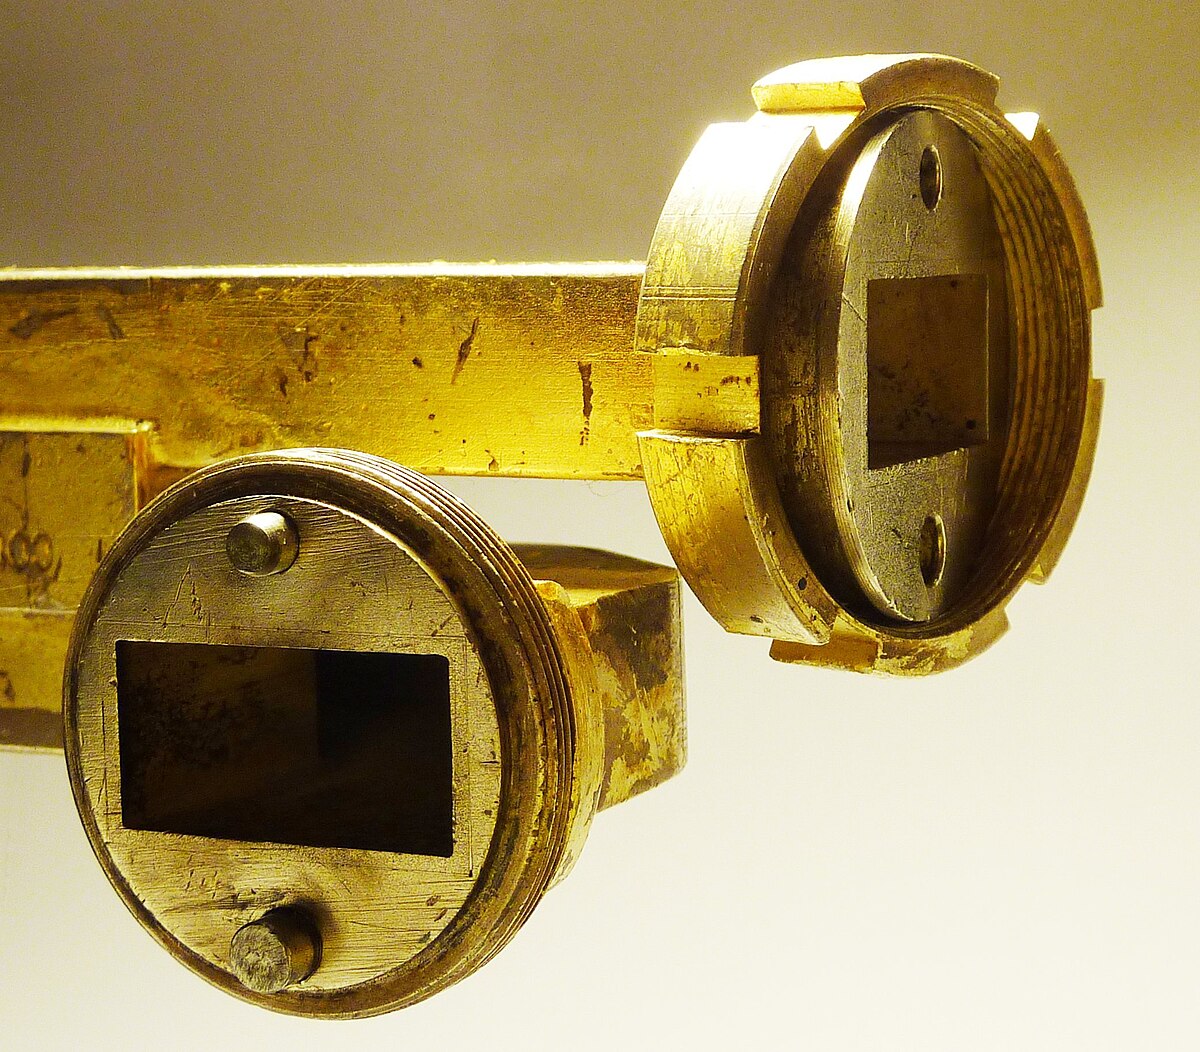 https://upload.wikimedia.org/wikipedia/commons/thumb/9/98/Waveguide-flange-with-threaded-collar.jpg/1200px-Waveguide-flange-with-threaded-collar.jpg